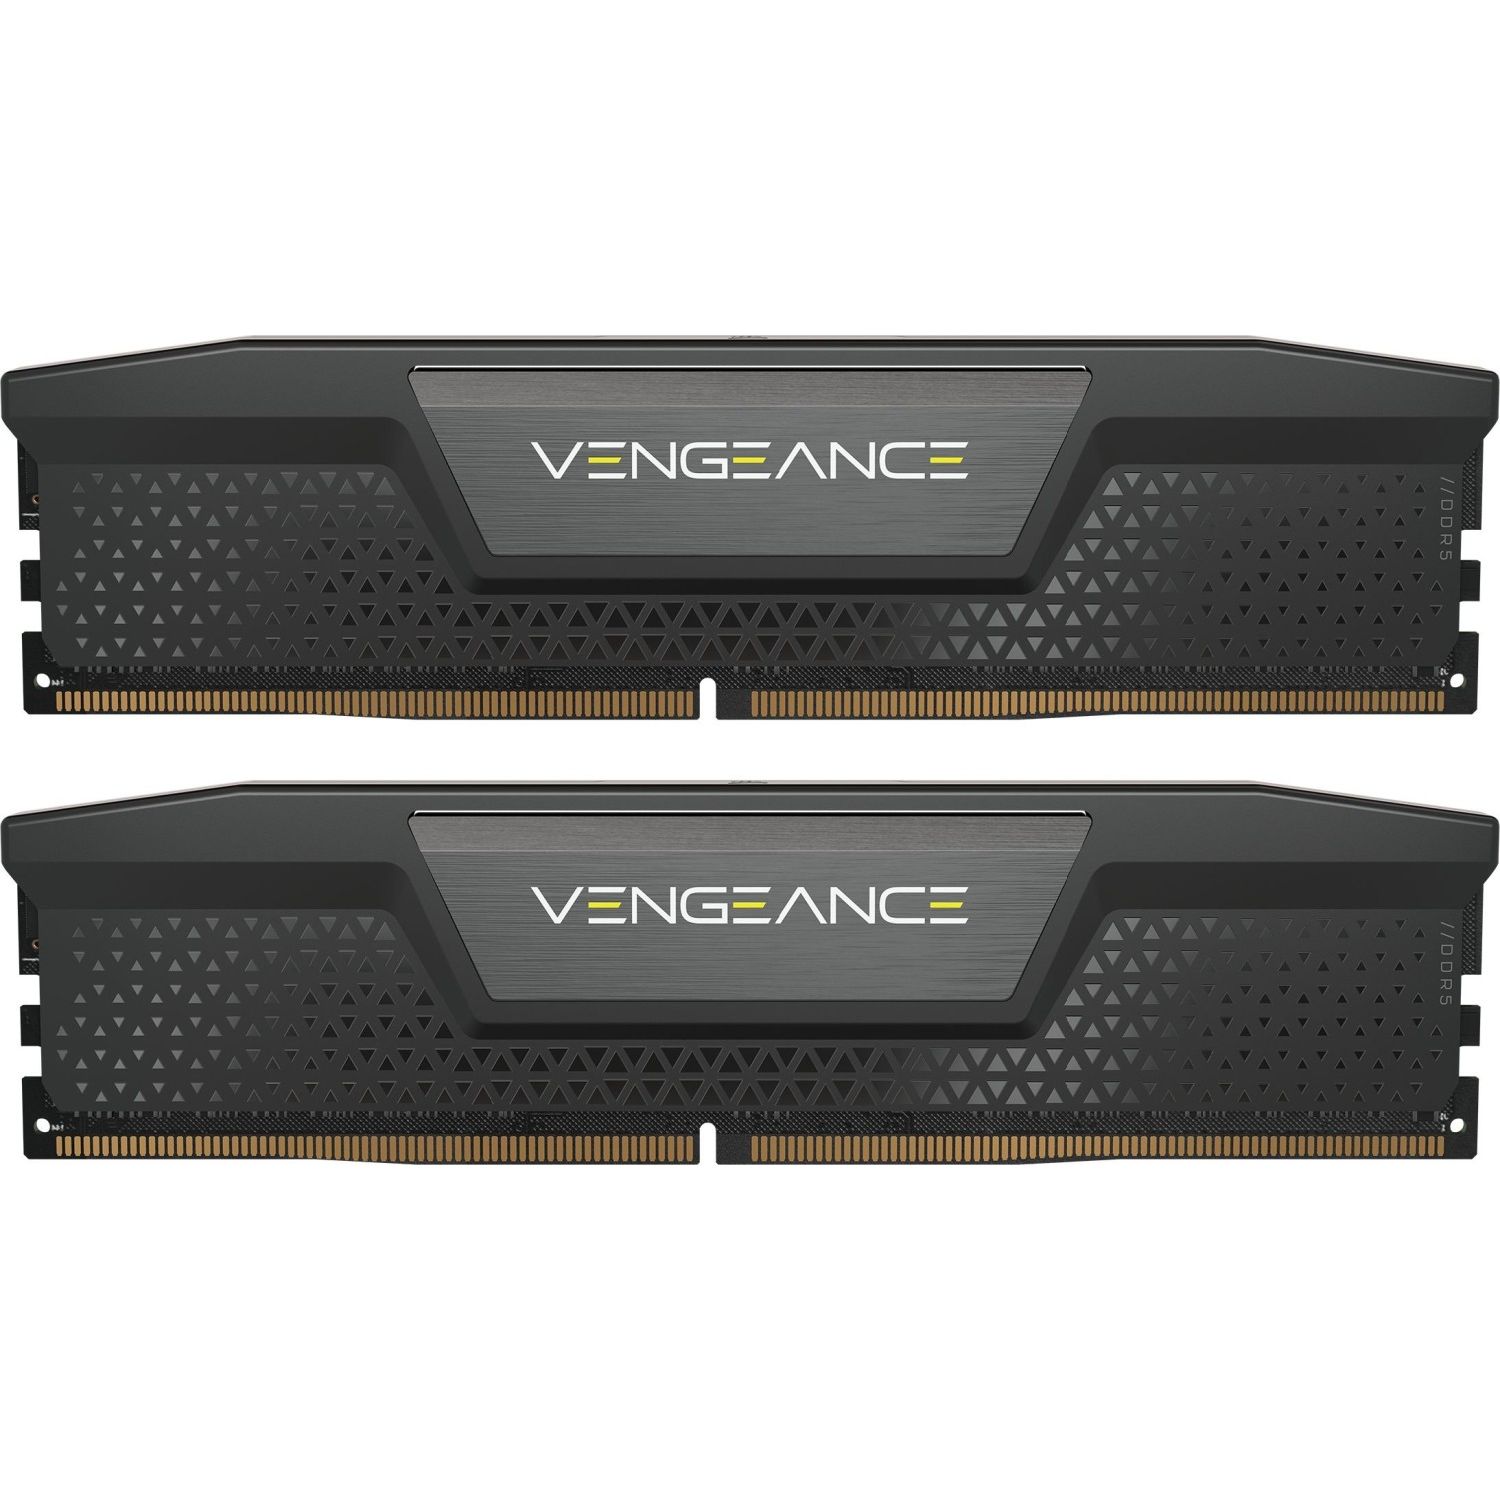 Memorie RAM DIMM Corsair VENGEANCE® 32GB (2x16GB) DDR5 DRAM 5200MHz C40 Memory Kit — Black  Fan Included No Memory Series VENGEANCE DDR5 Memory Type DDR5 PMIC Type Overclock PMIC Memory Size 32GB (2 x 16GB) Tested Latency 40-40-40-77 Tested Voltage 1.40 Tested Speed 7200  Memory Color BLACK SPD_1